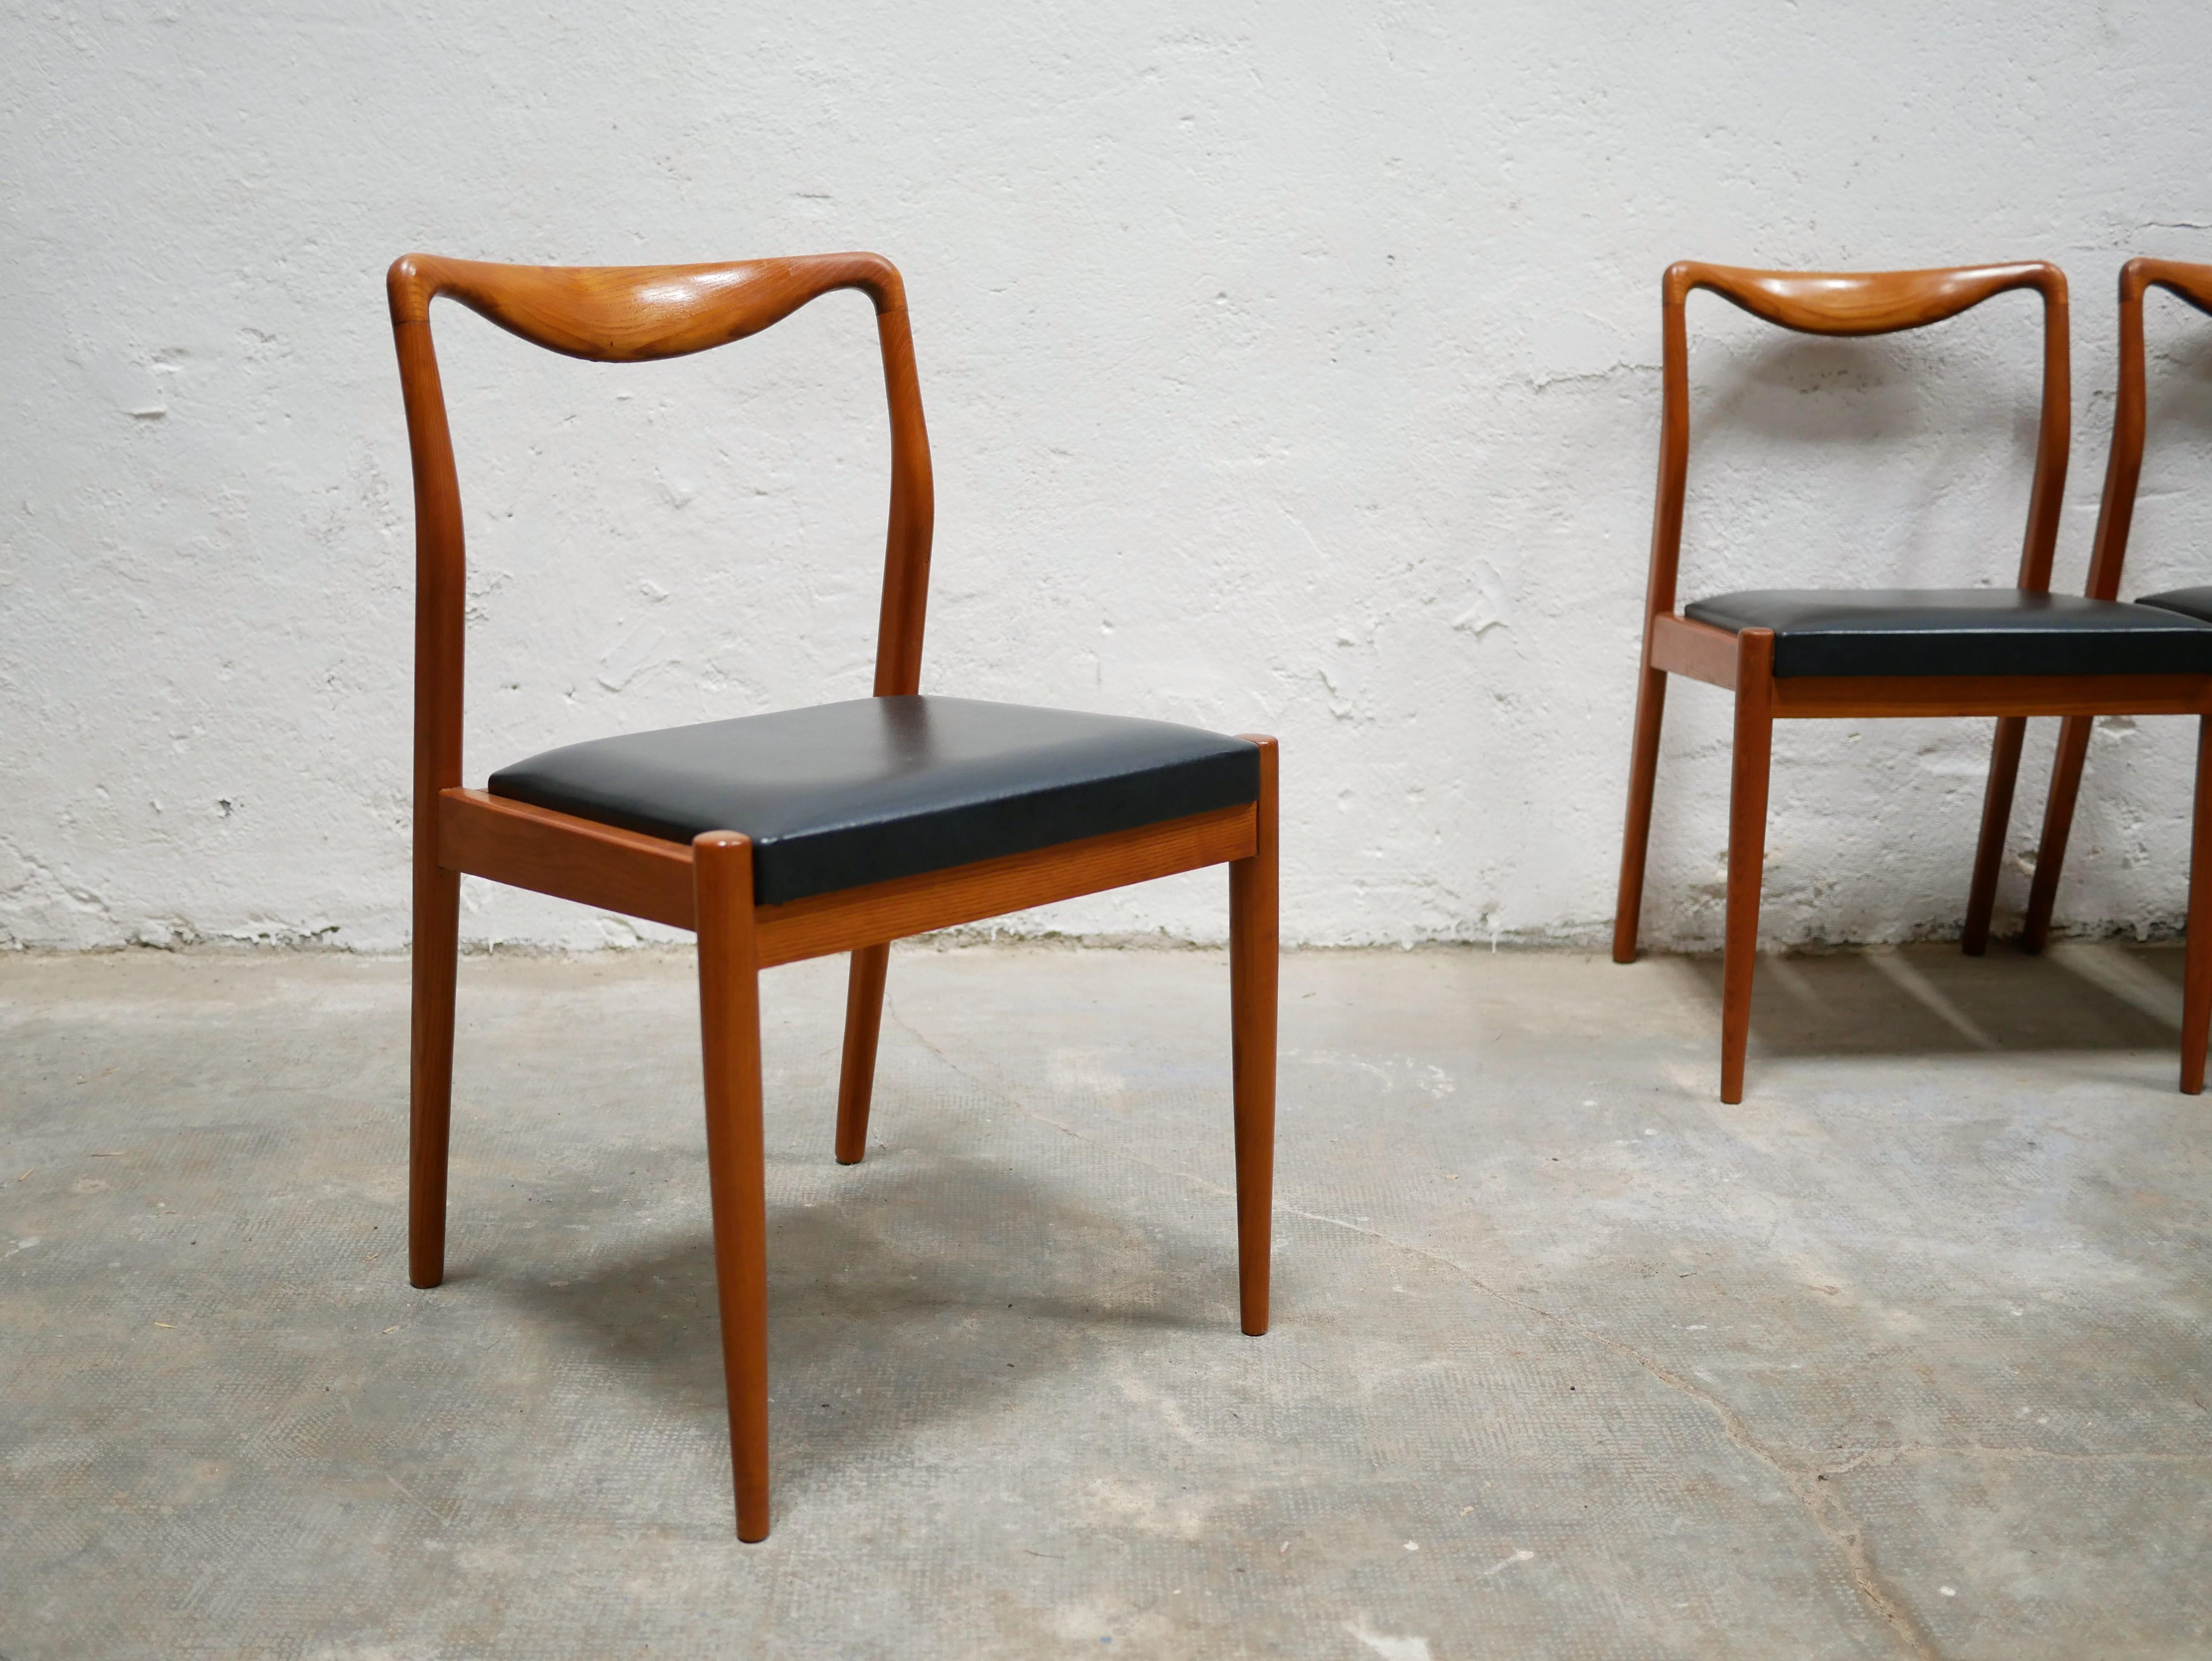 Series of 4 Vintage Scandinavian Chairs in Teak and Leatherette For Sale 3